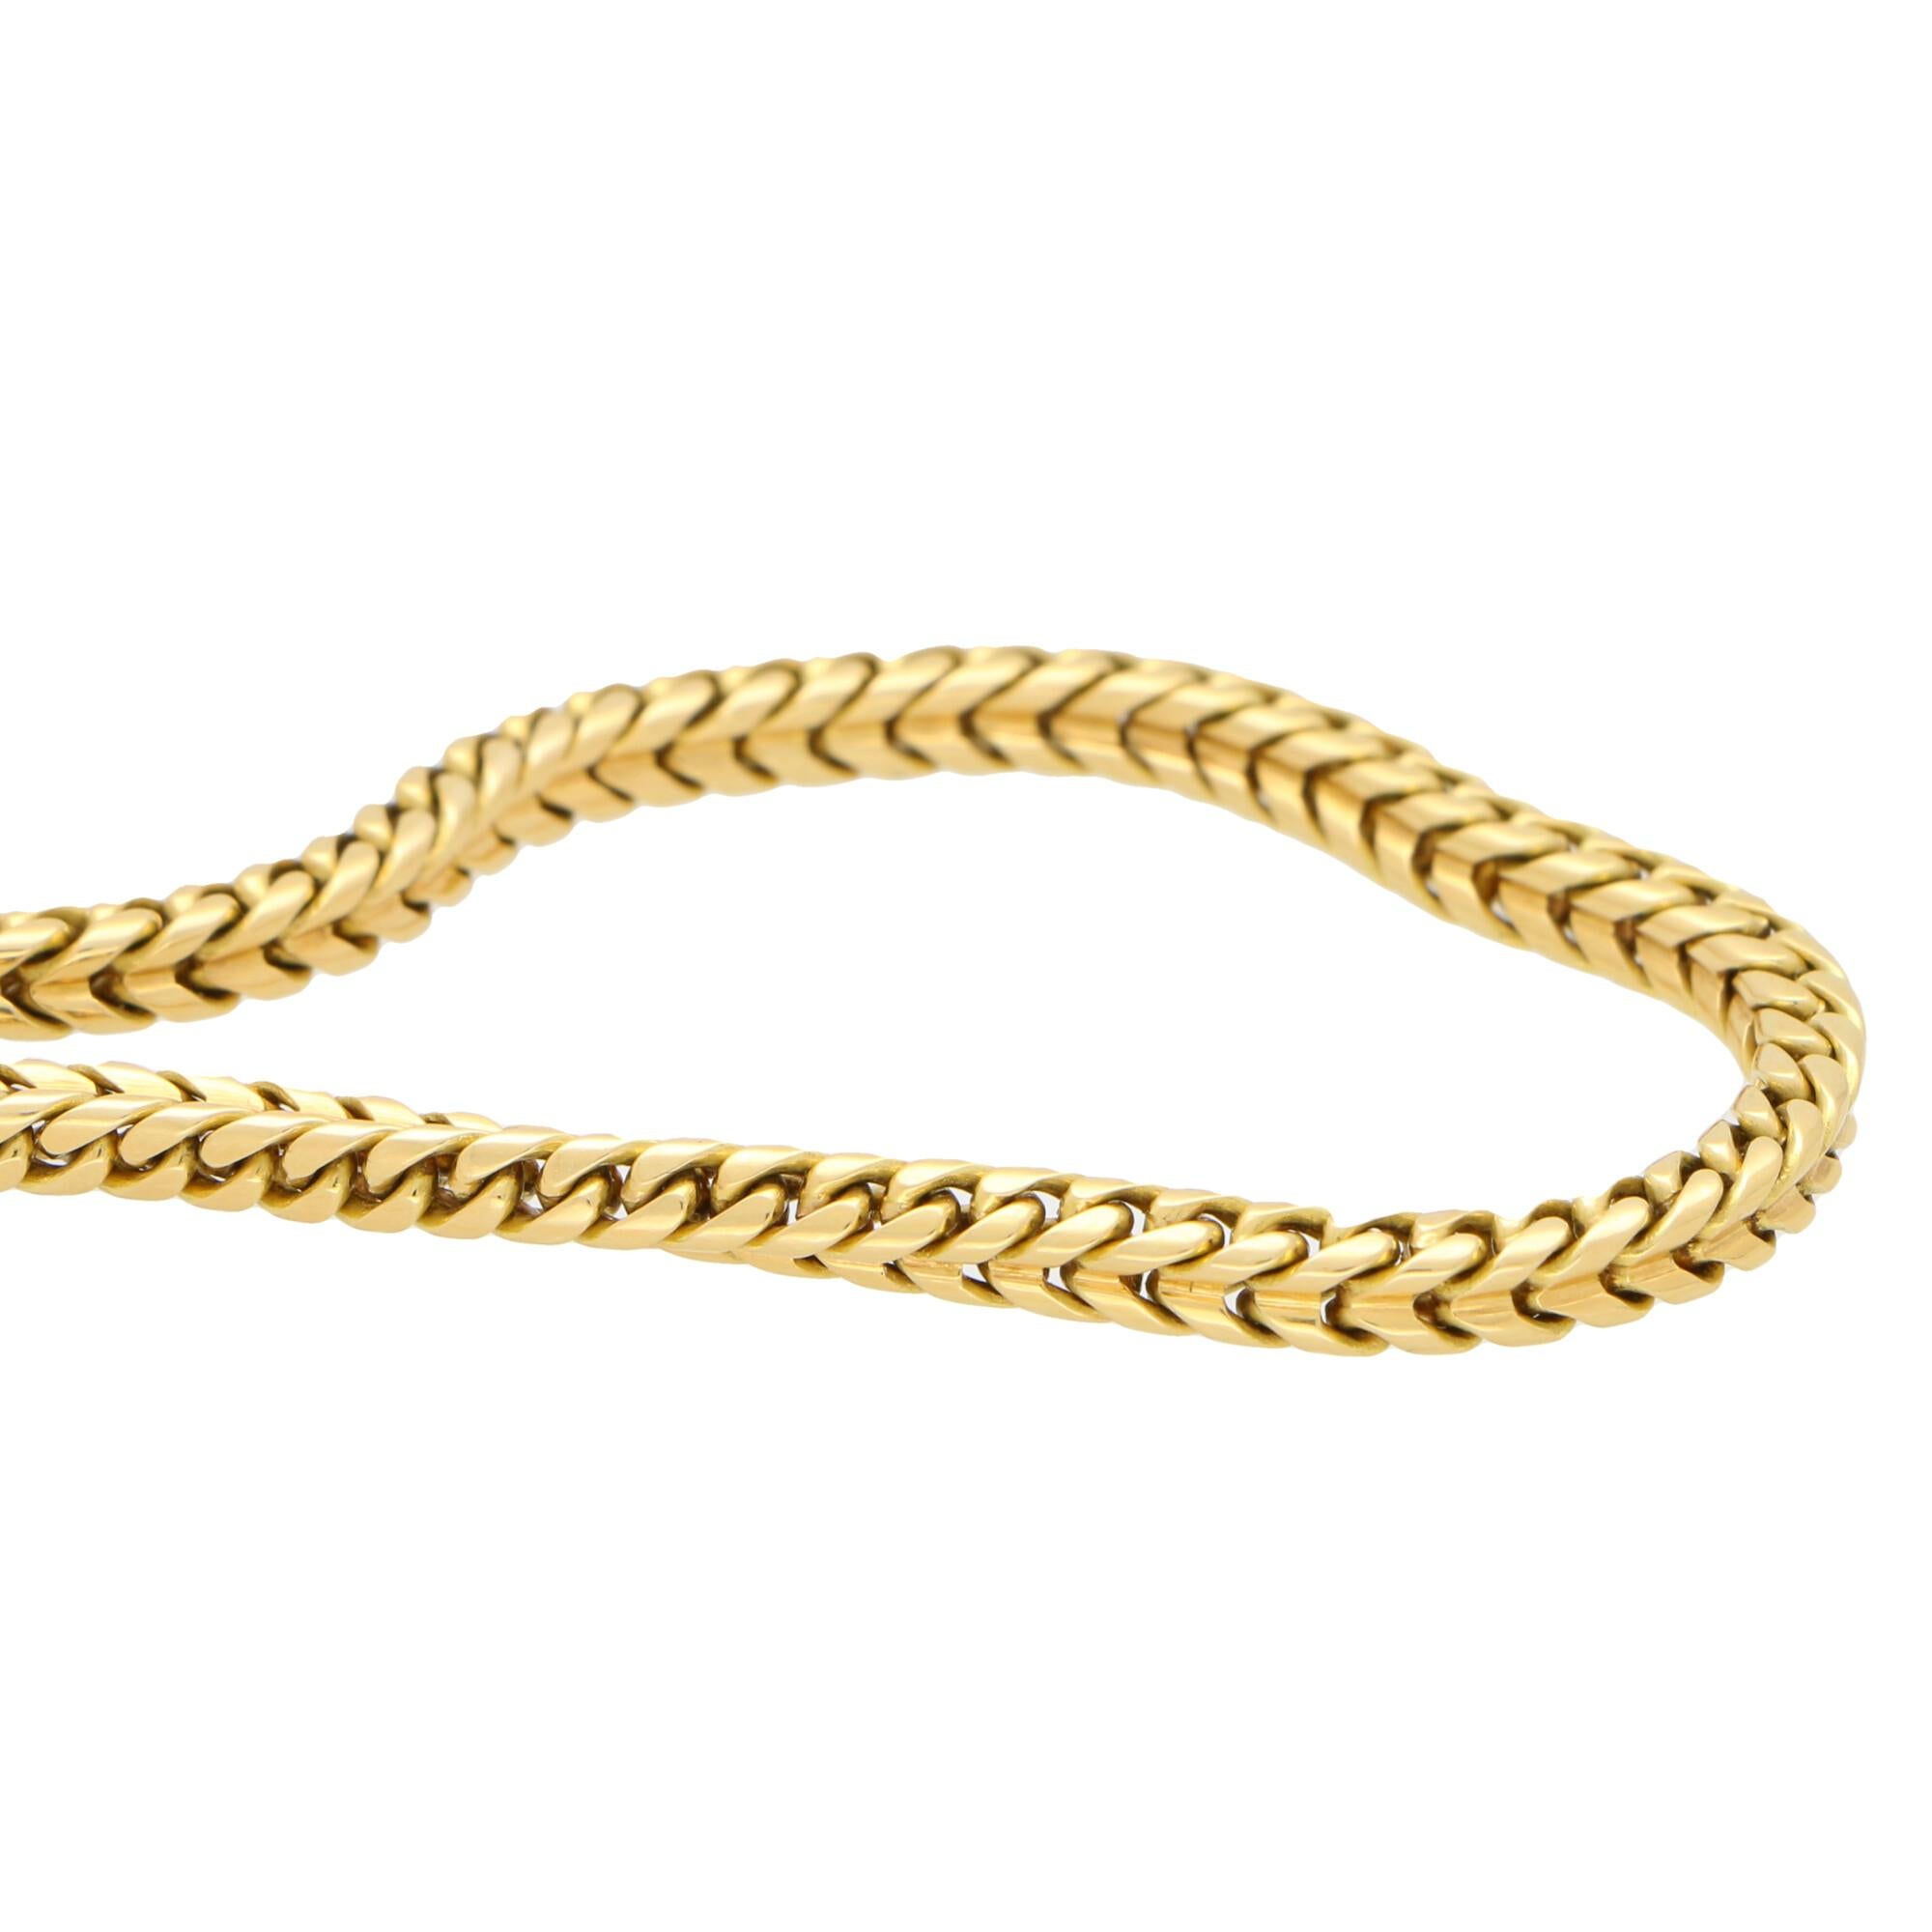 Modern Vintage Chunky Chain Necklace in 18 Karat Yellow Gold